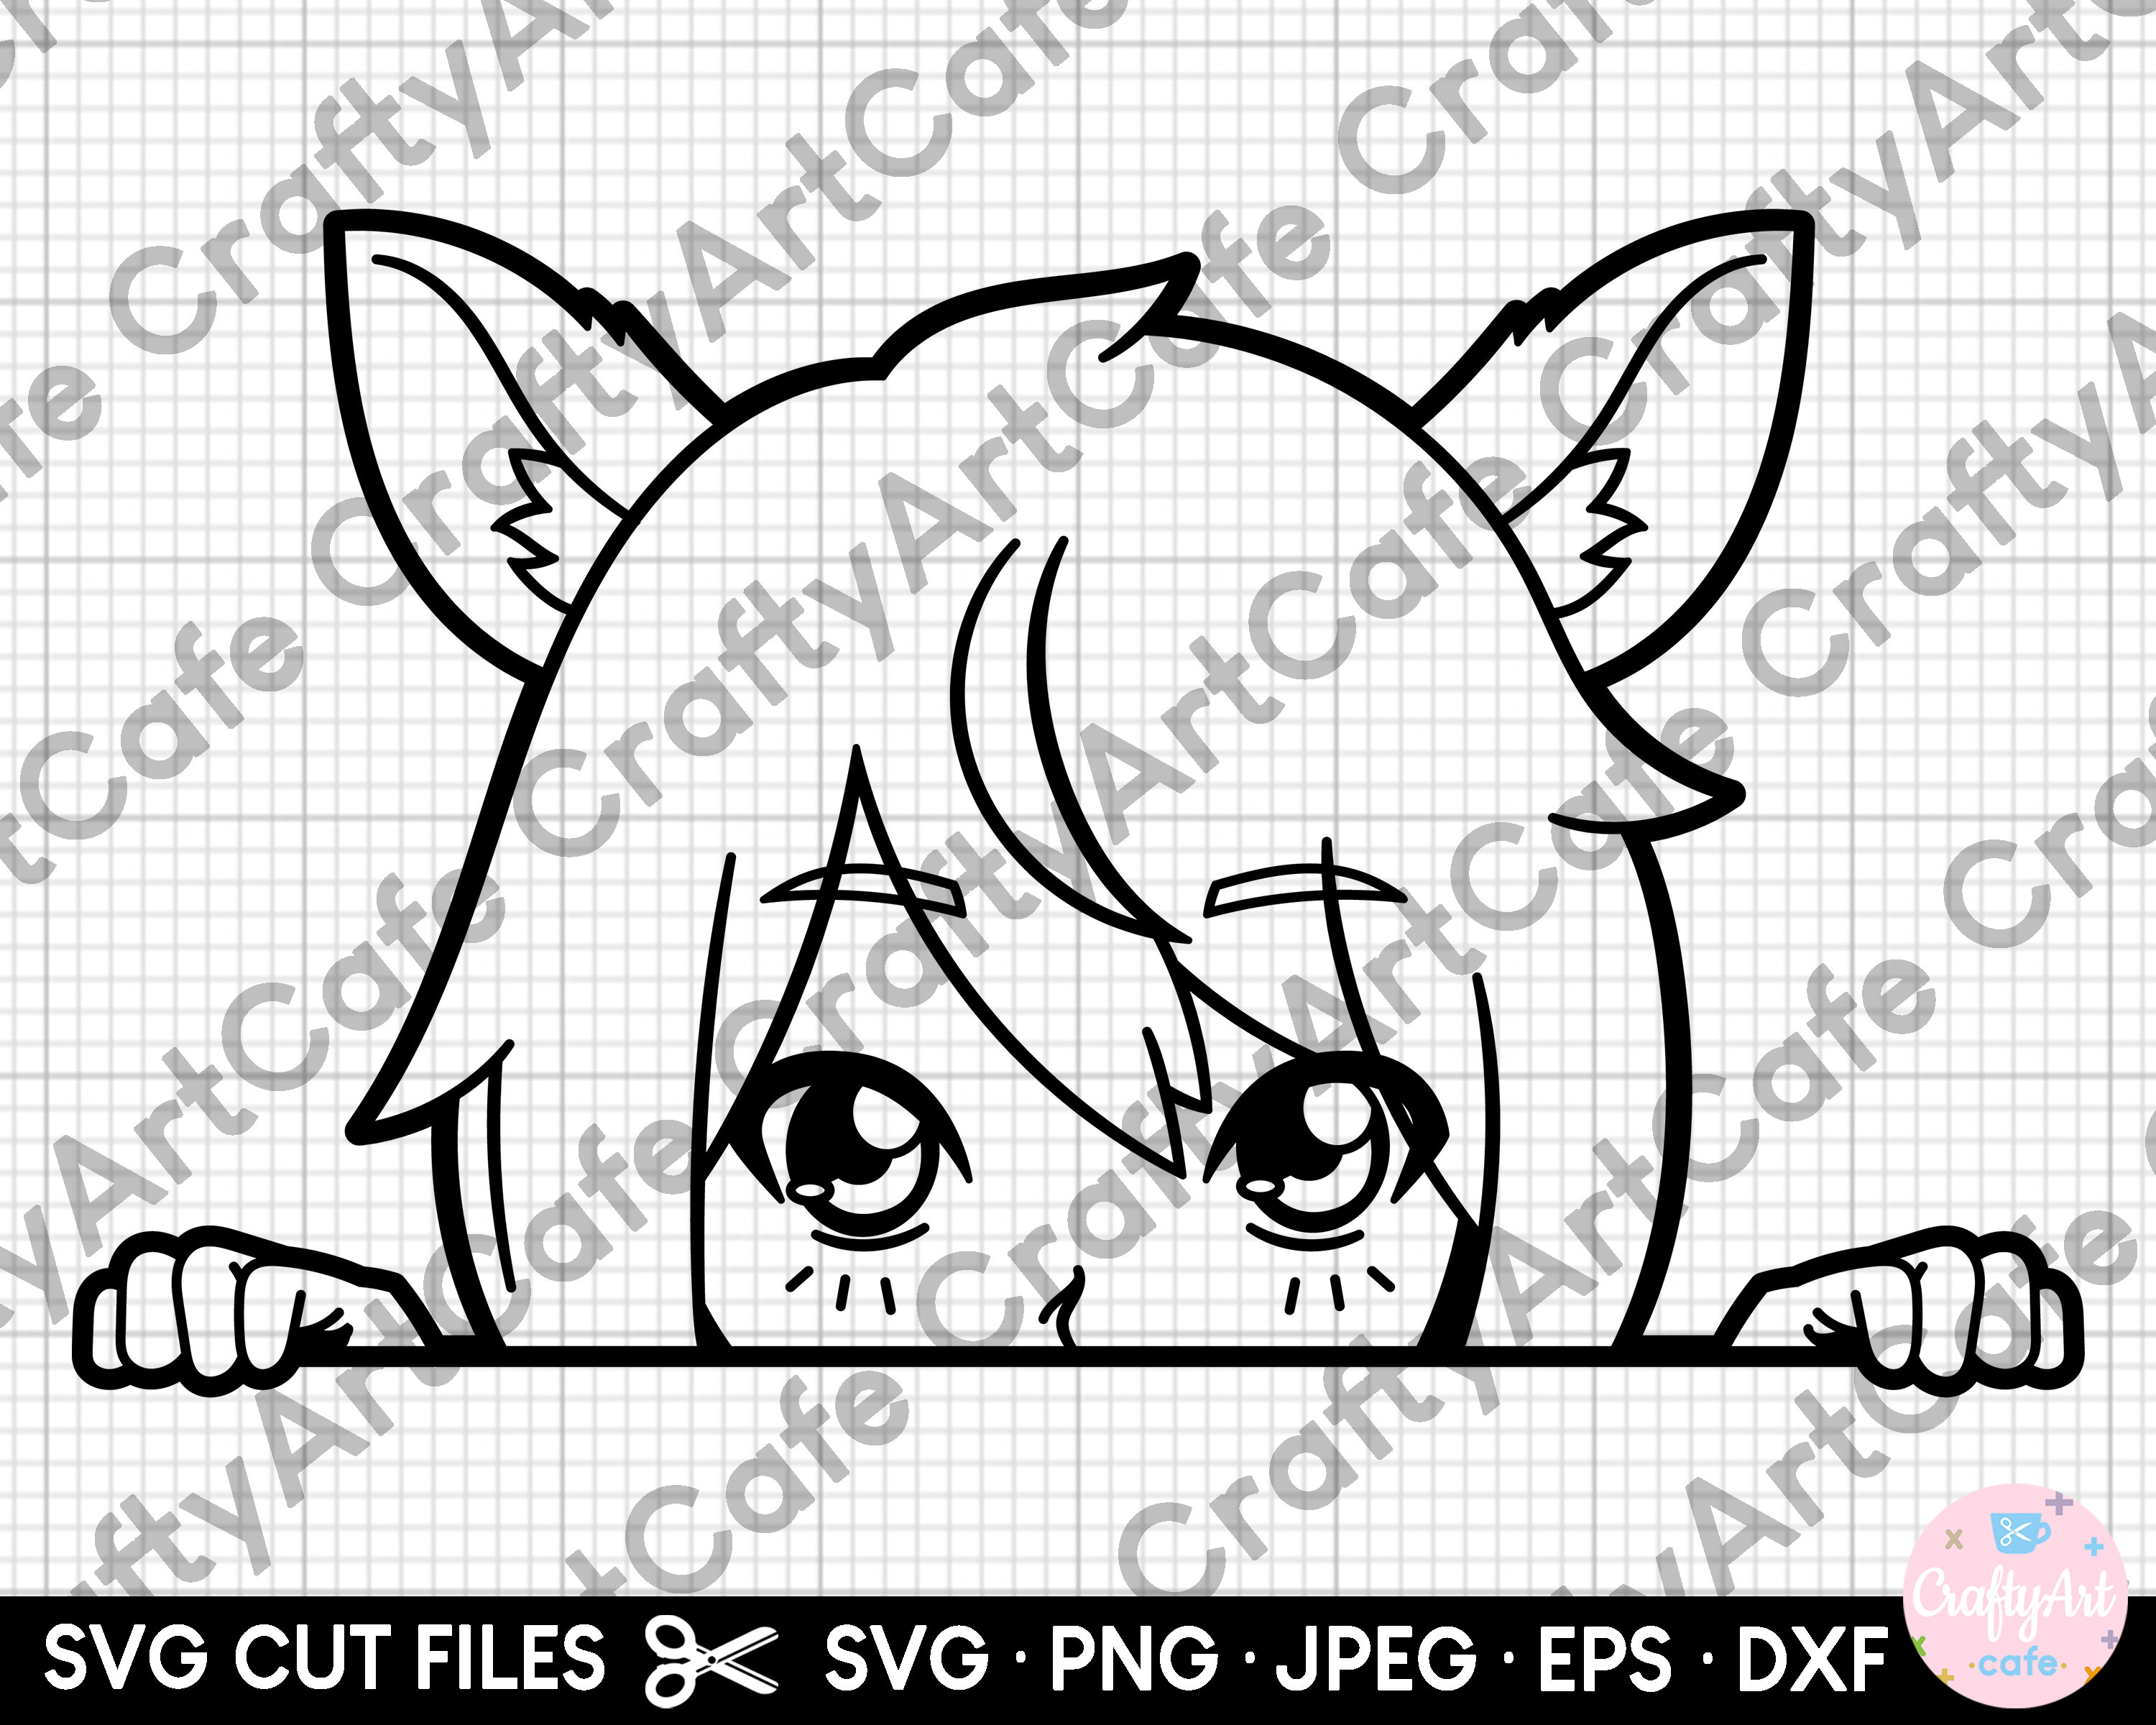 gacha life - Google Search  Cute drawings, Coloring pages, Anime wolf girl